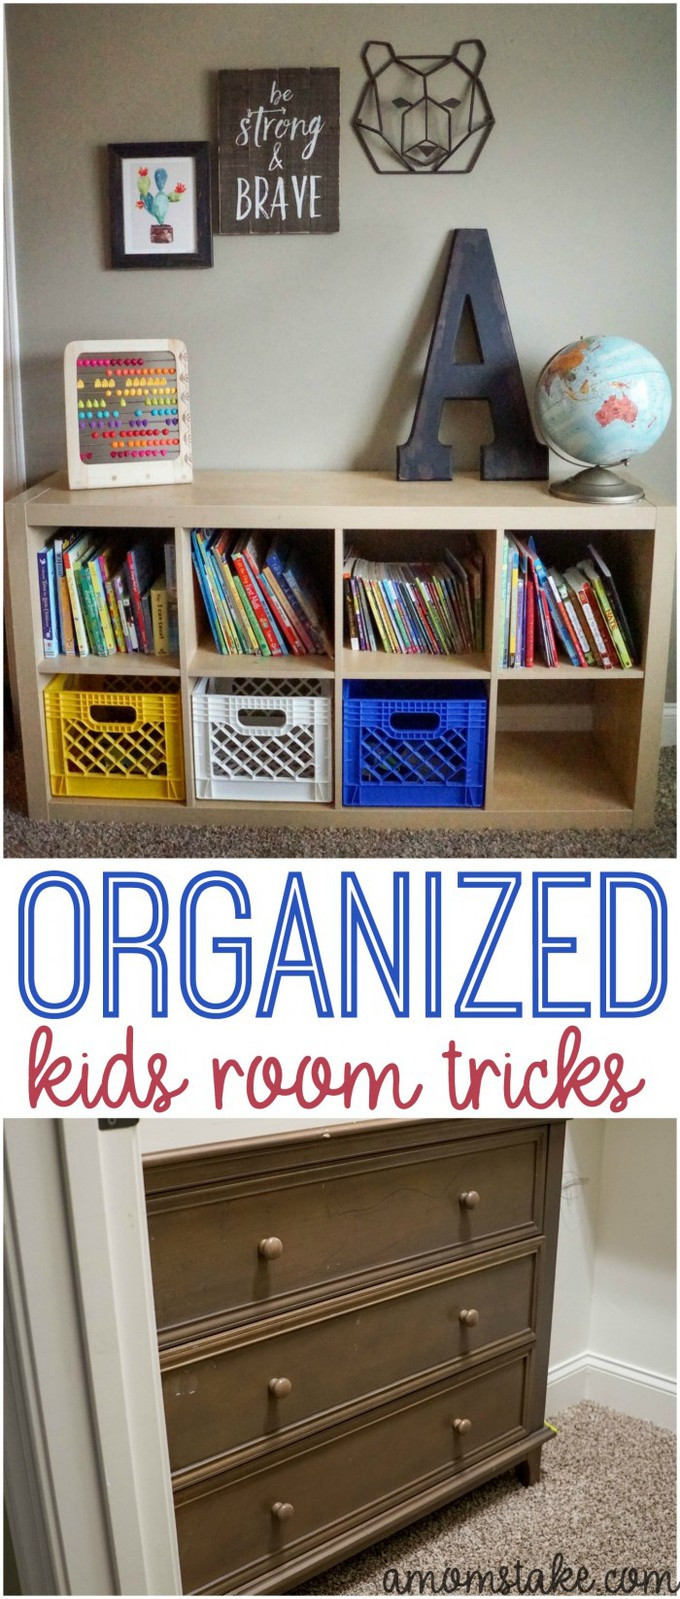 How To Organize Your Room For Kids
 6 Tricks of an Organized Kids Room and how to keep it